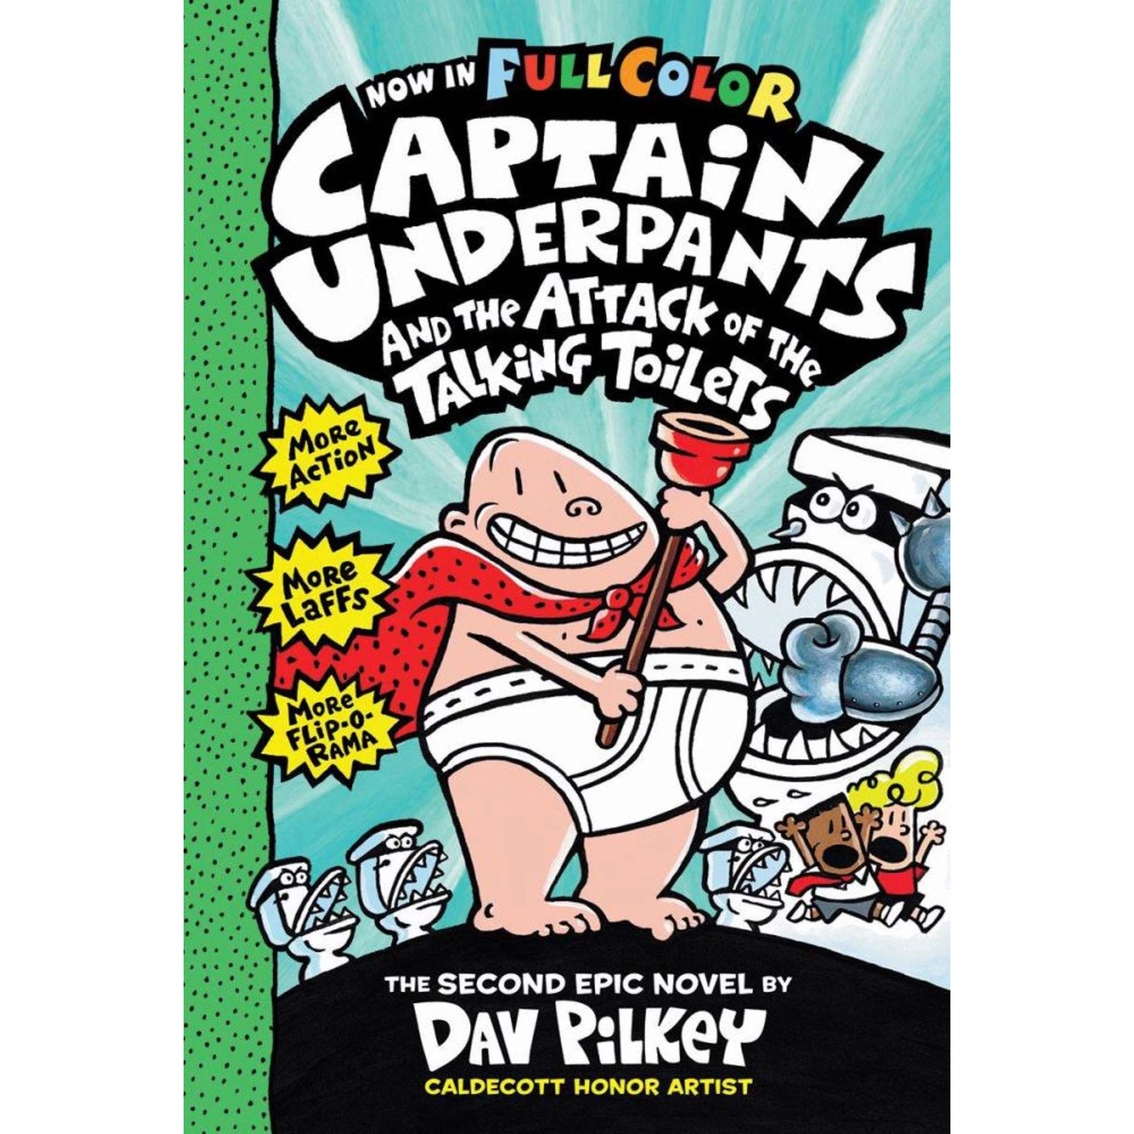 Captain Underpants and the Attack of the Talking Toilets: Color Edition